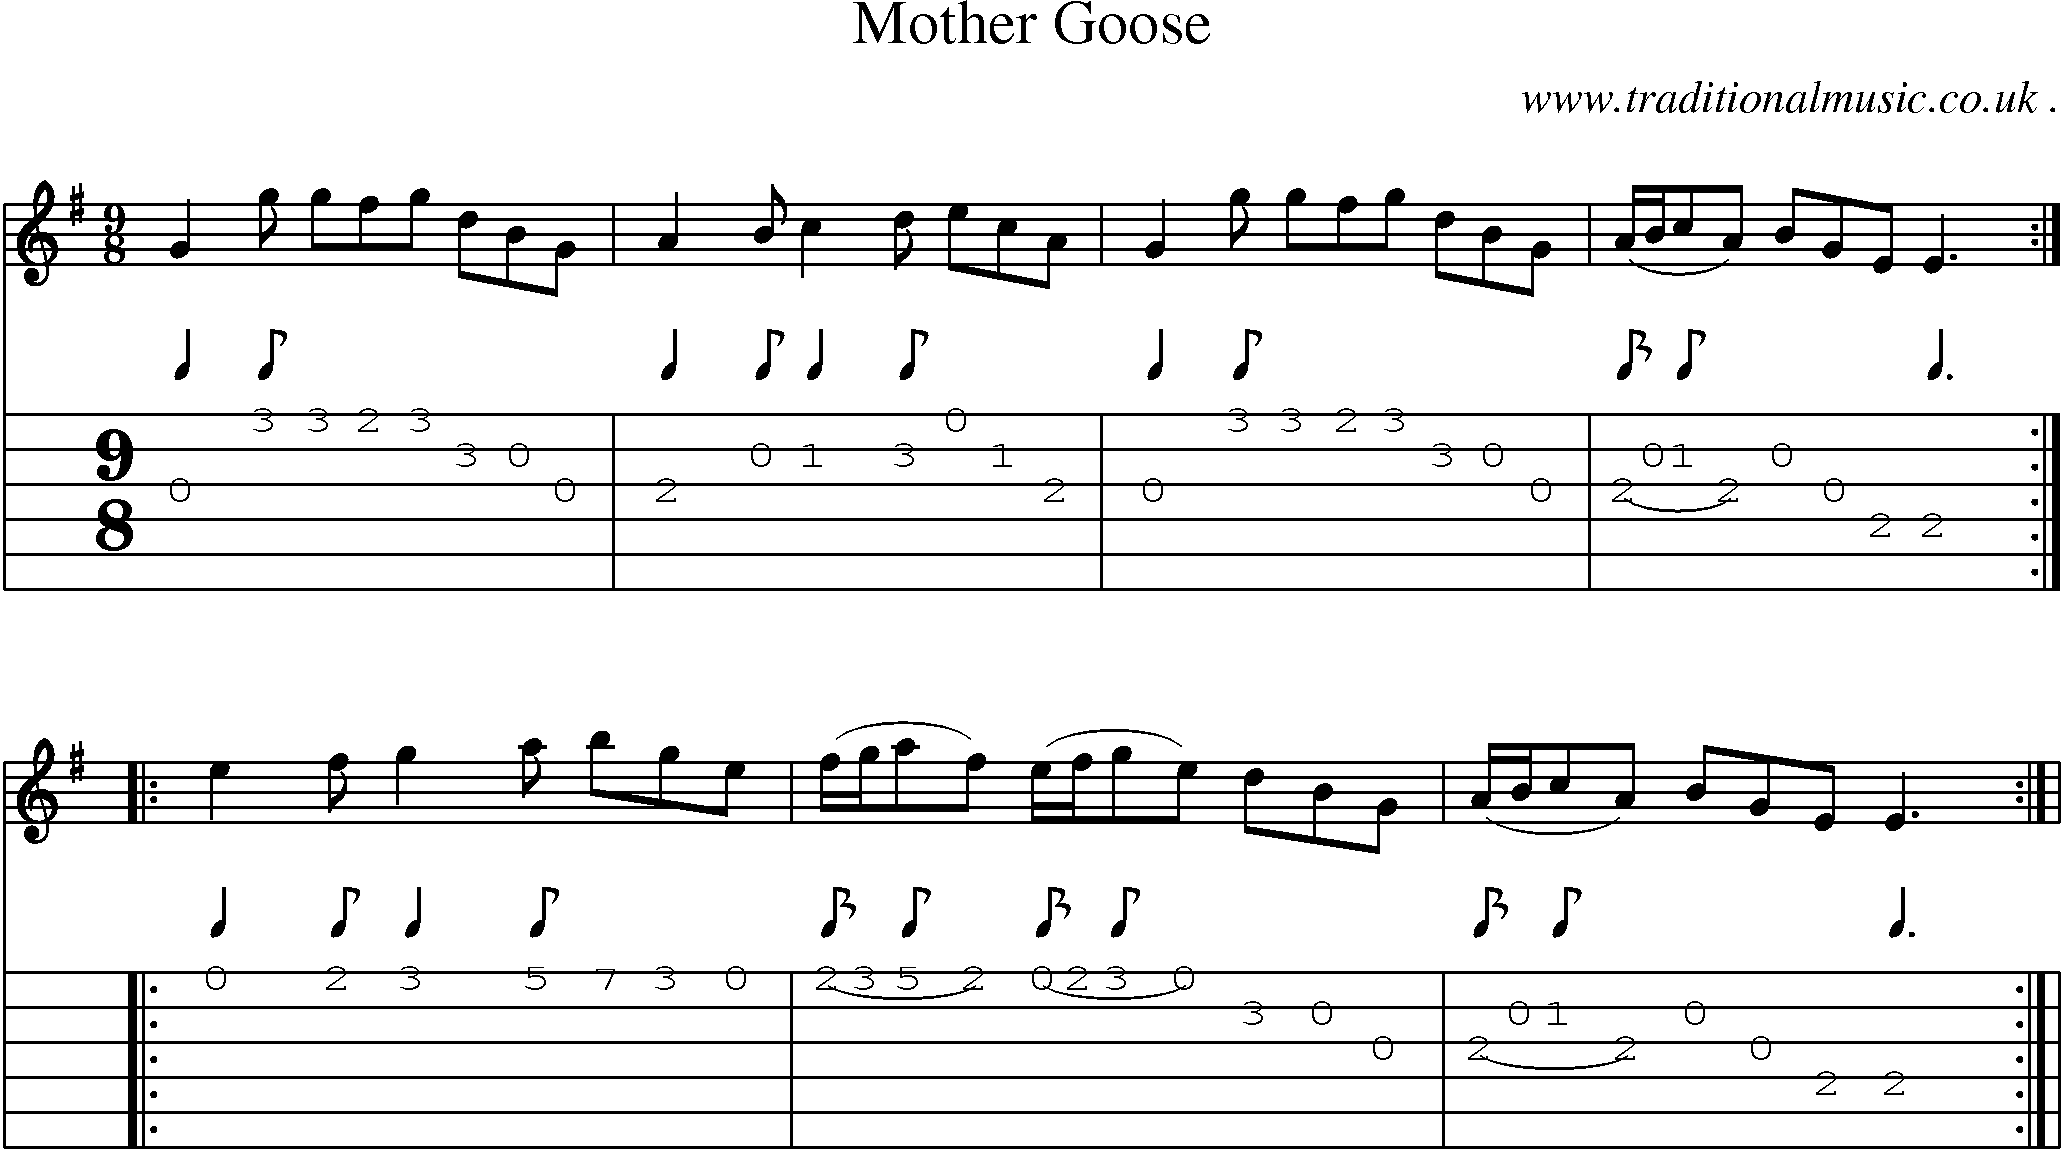 Sheet-Music and Guitar Tabs for Mother Goose